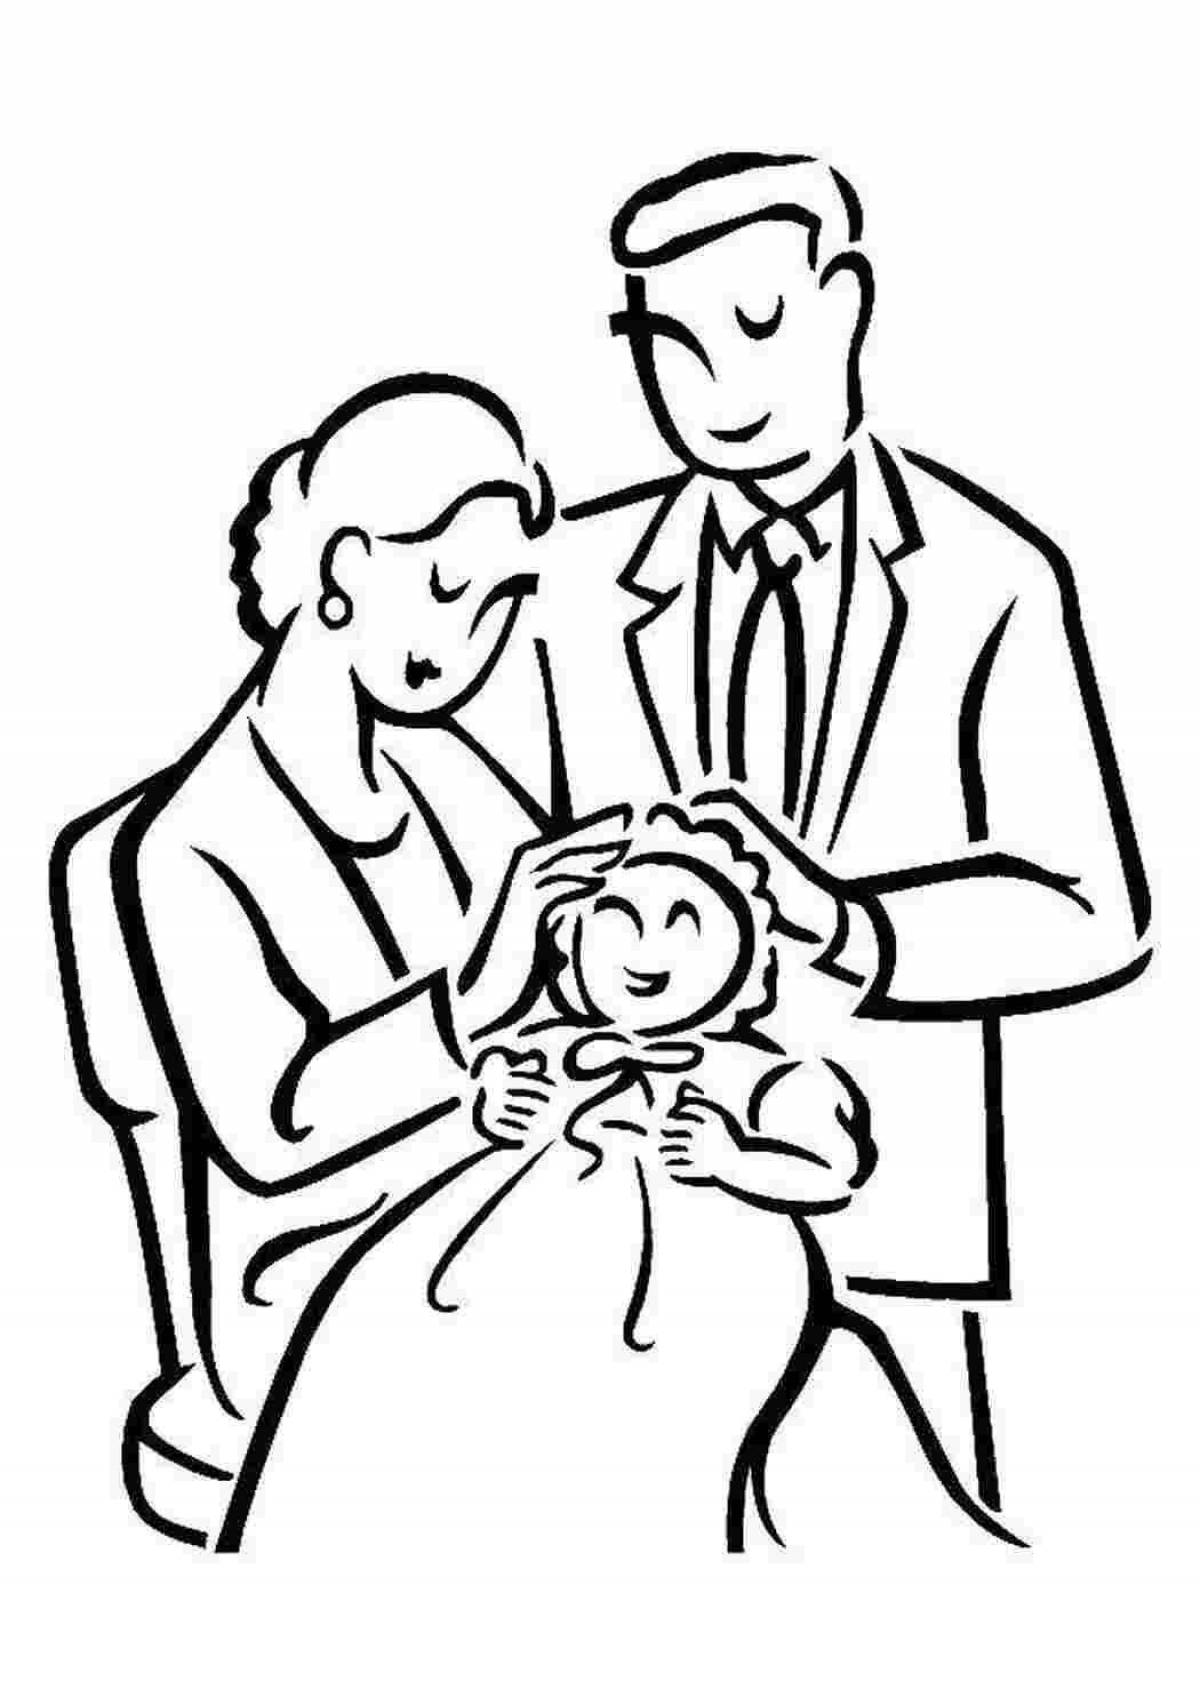 Radiant coloring page mom and dad for kids